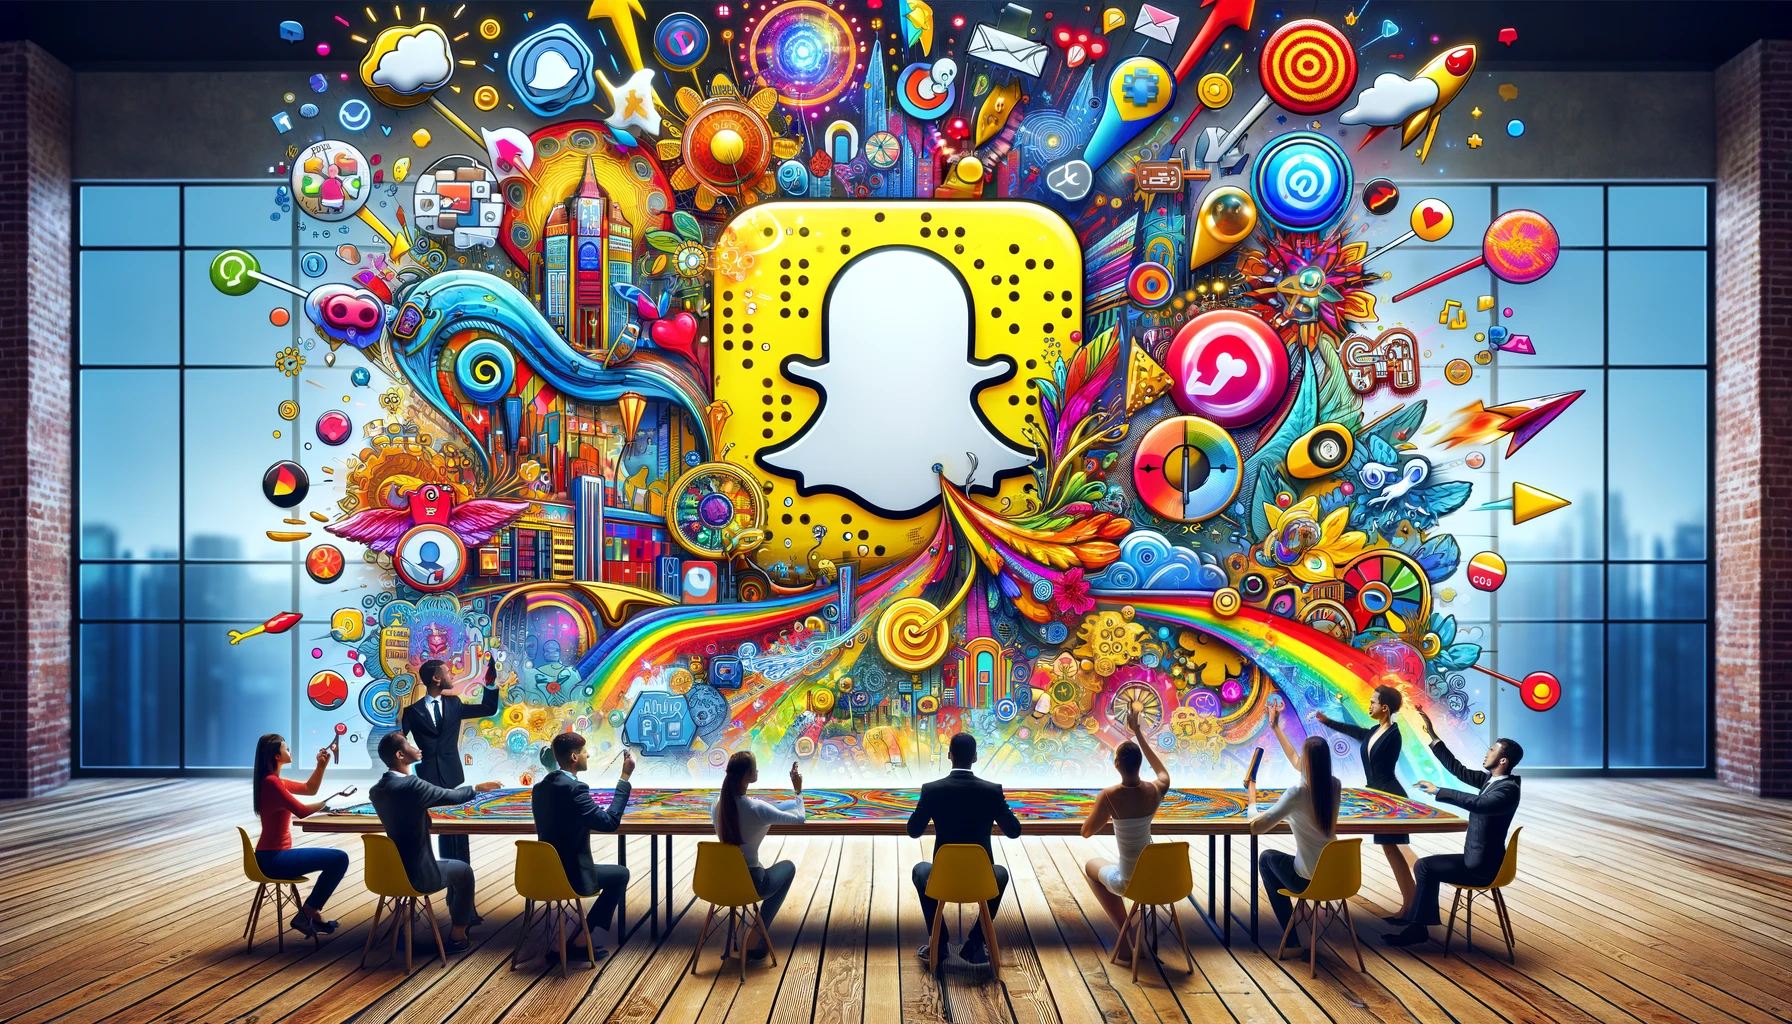 Creative representation of Snapchat Geofilters Engagement, showcasing vibrant, interactive designs that signify personalized and local-themed user interactions.